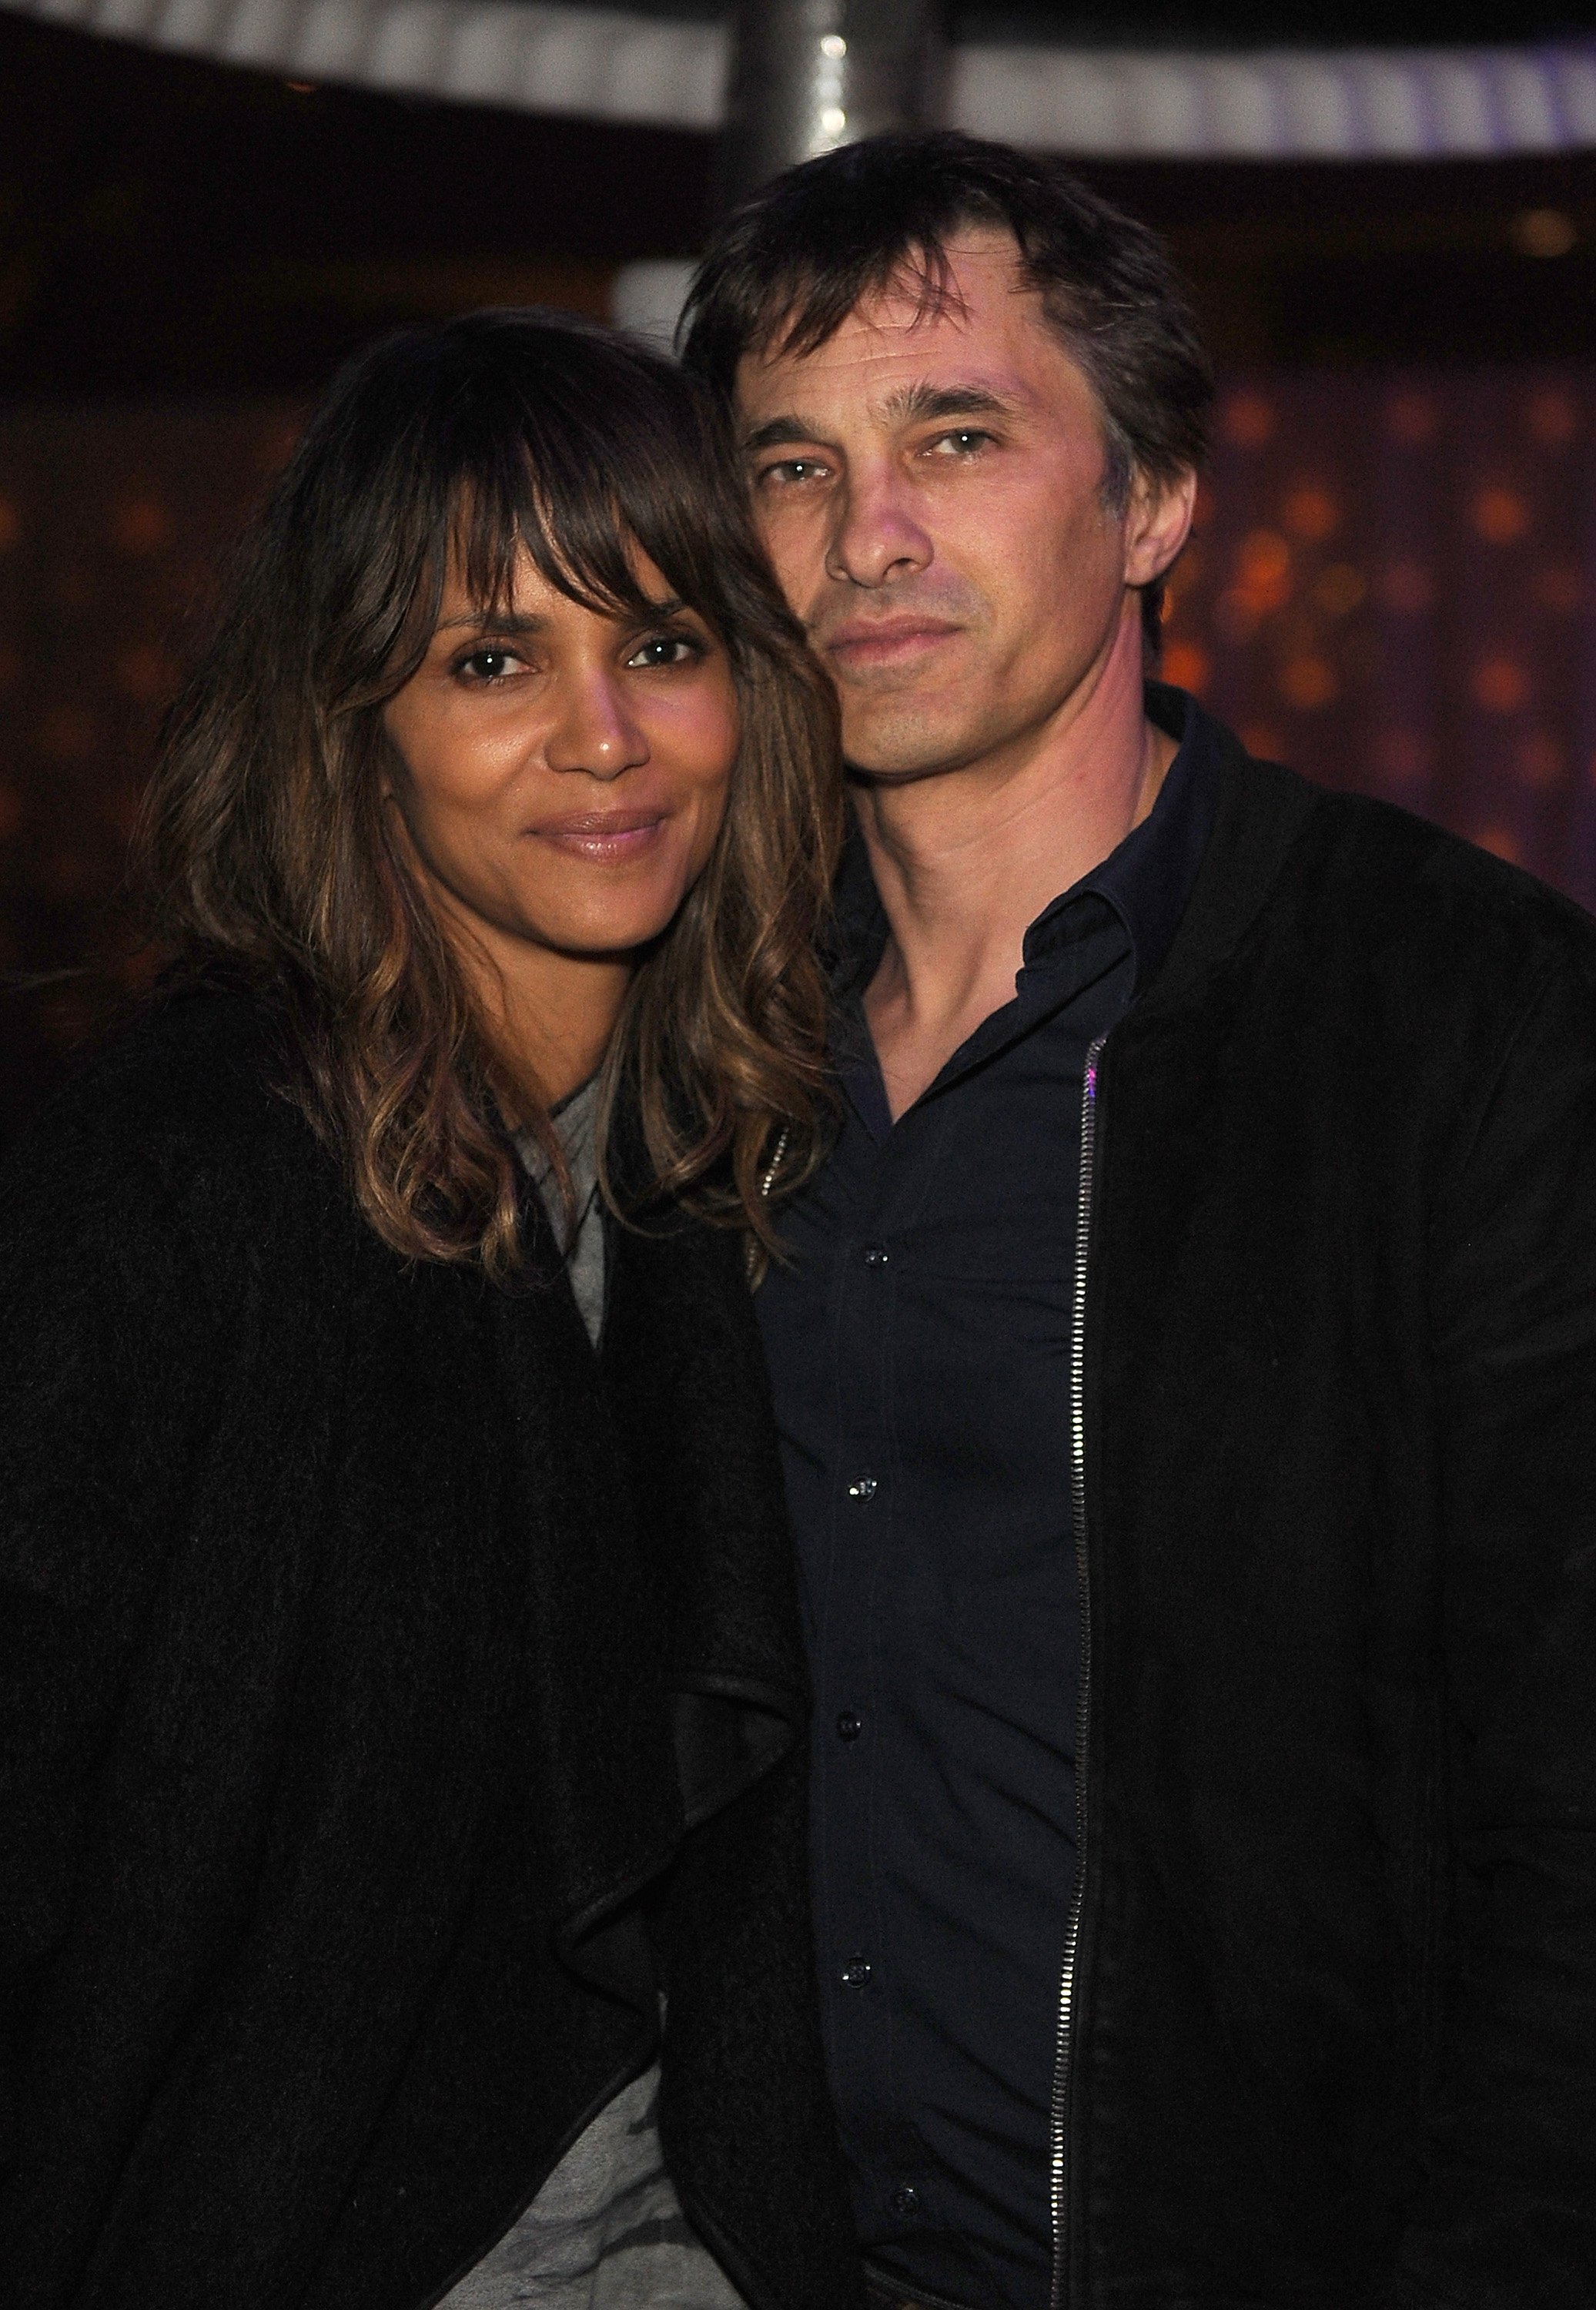 Halle Berry and Olivier Martinez attend the Treats! Magazine Pre-Oscar Party on February 21, 2015, in Los Angeles, California. | Source: Getty Images.